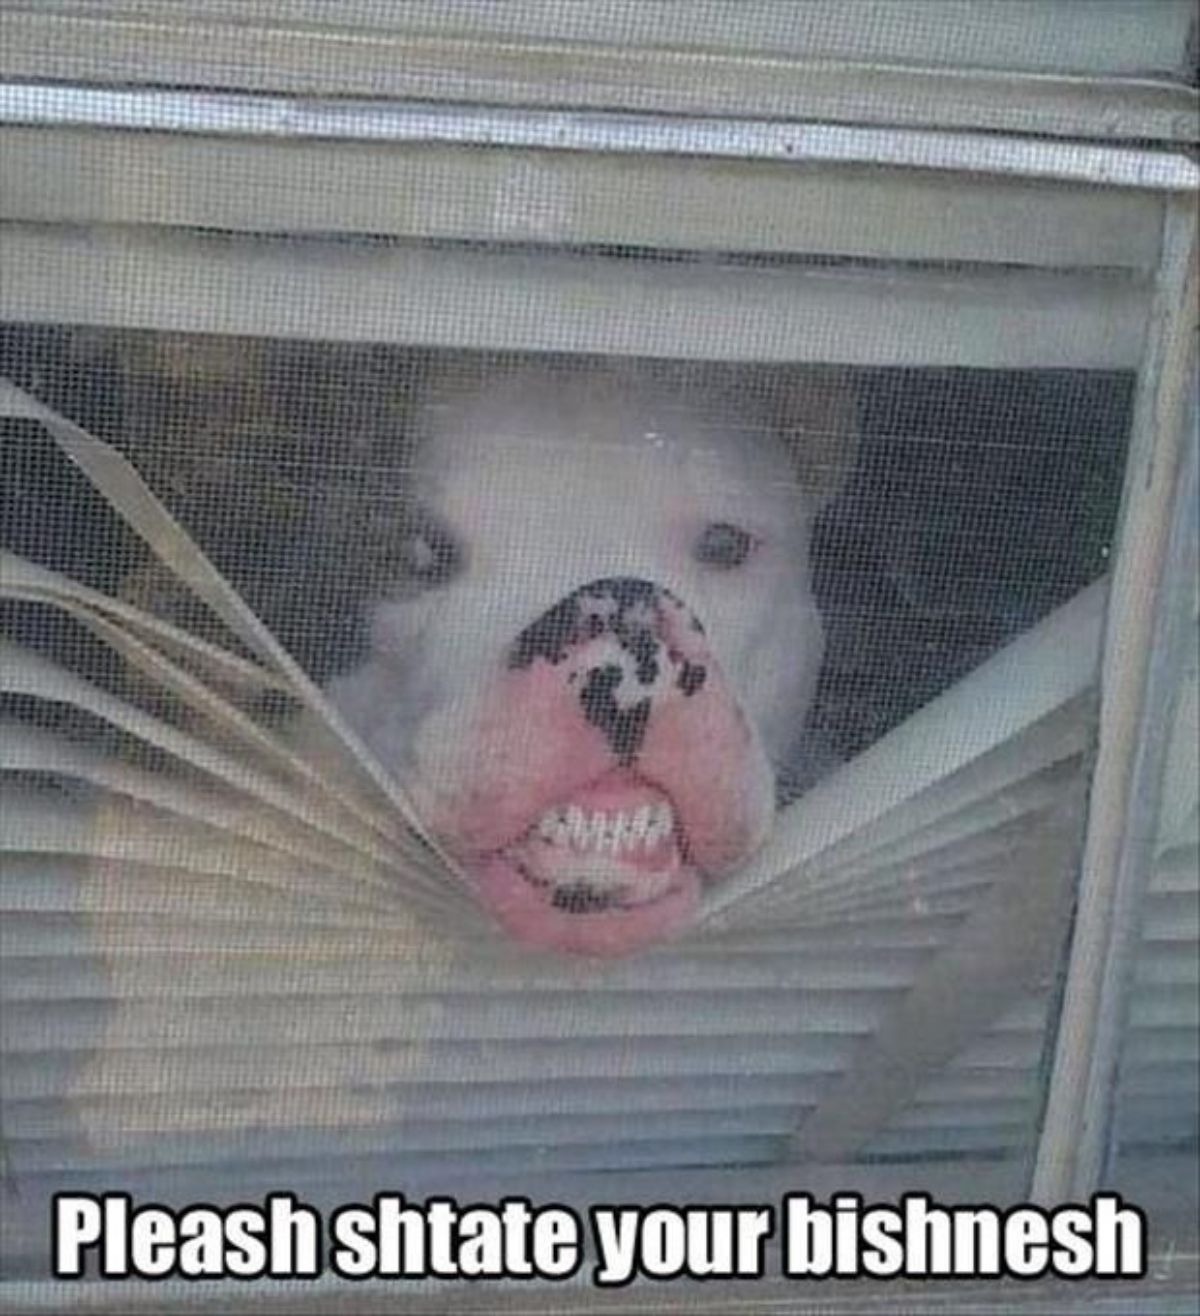 black and white pitbull looking through a mesh pushing white blinds down with the nose smushed against the mesh showing the teeth